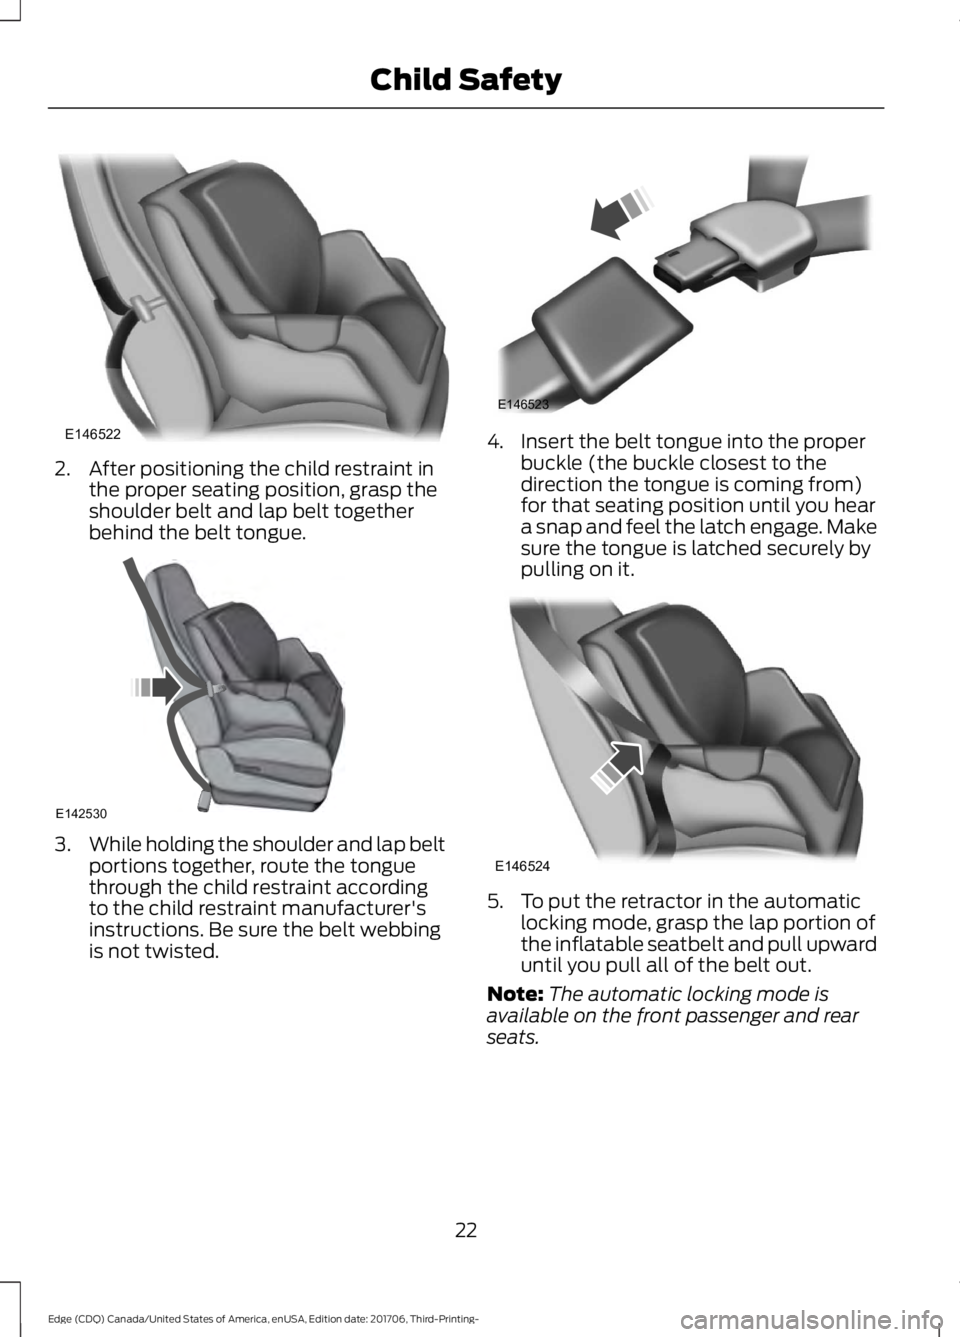 FORD EDGE 2018  Owners Manual 2. After positioning the child restraint in
the proper seating position, grasp the
shoulder belt and lap belt together
behind the belt tongue. 3.
While holding the shoulder and lap belt
portions toget